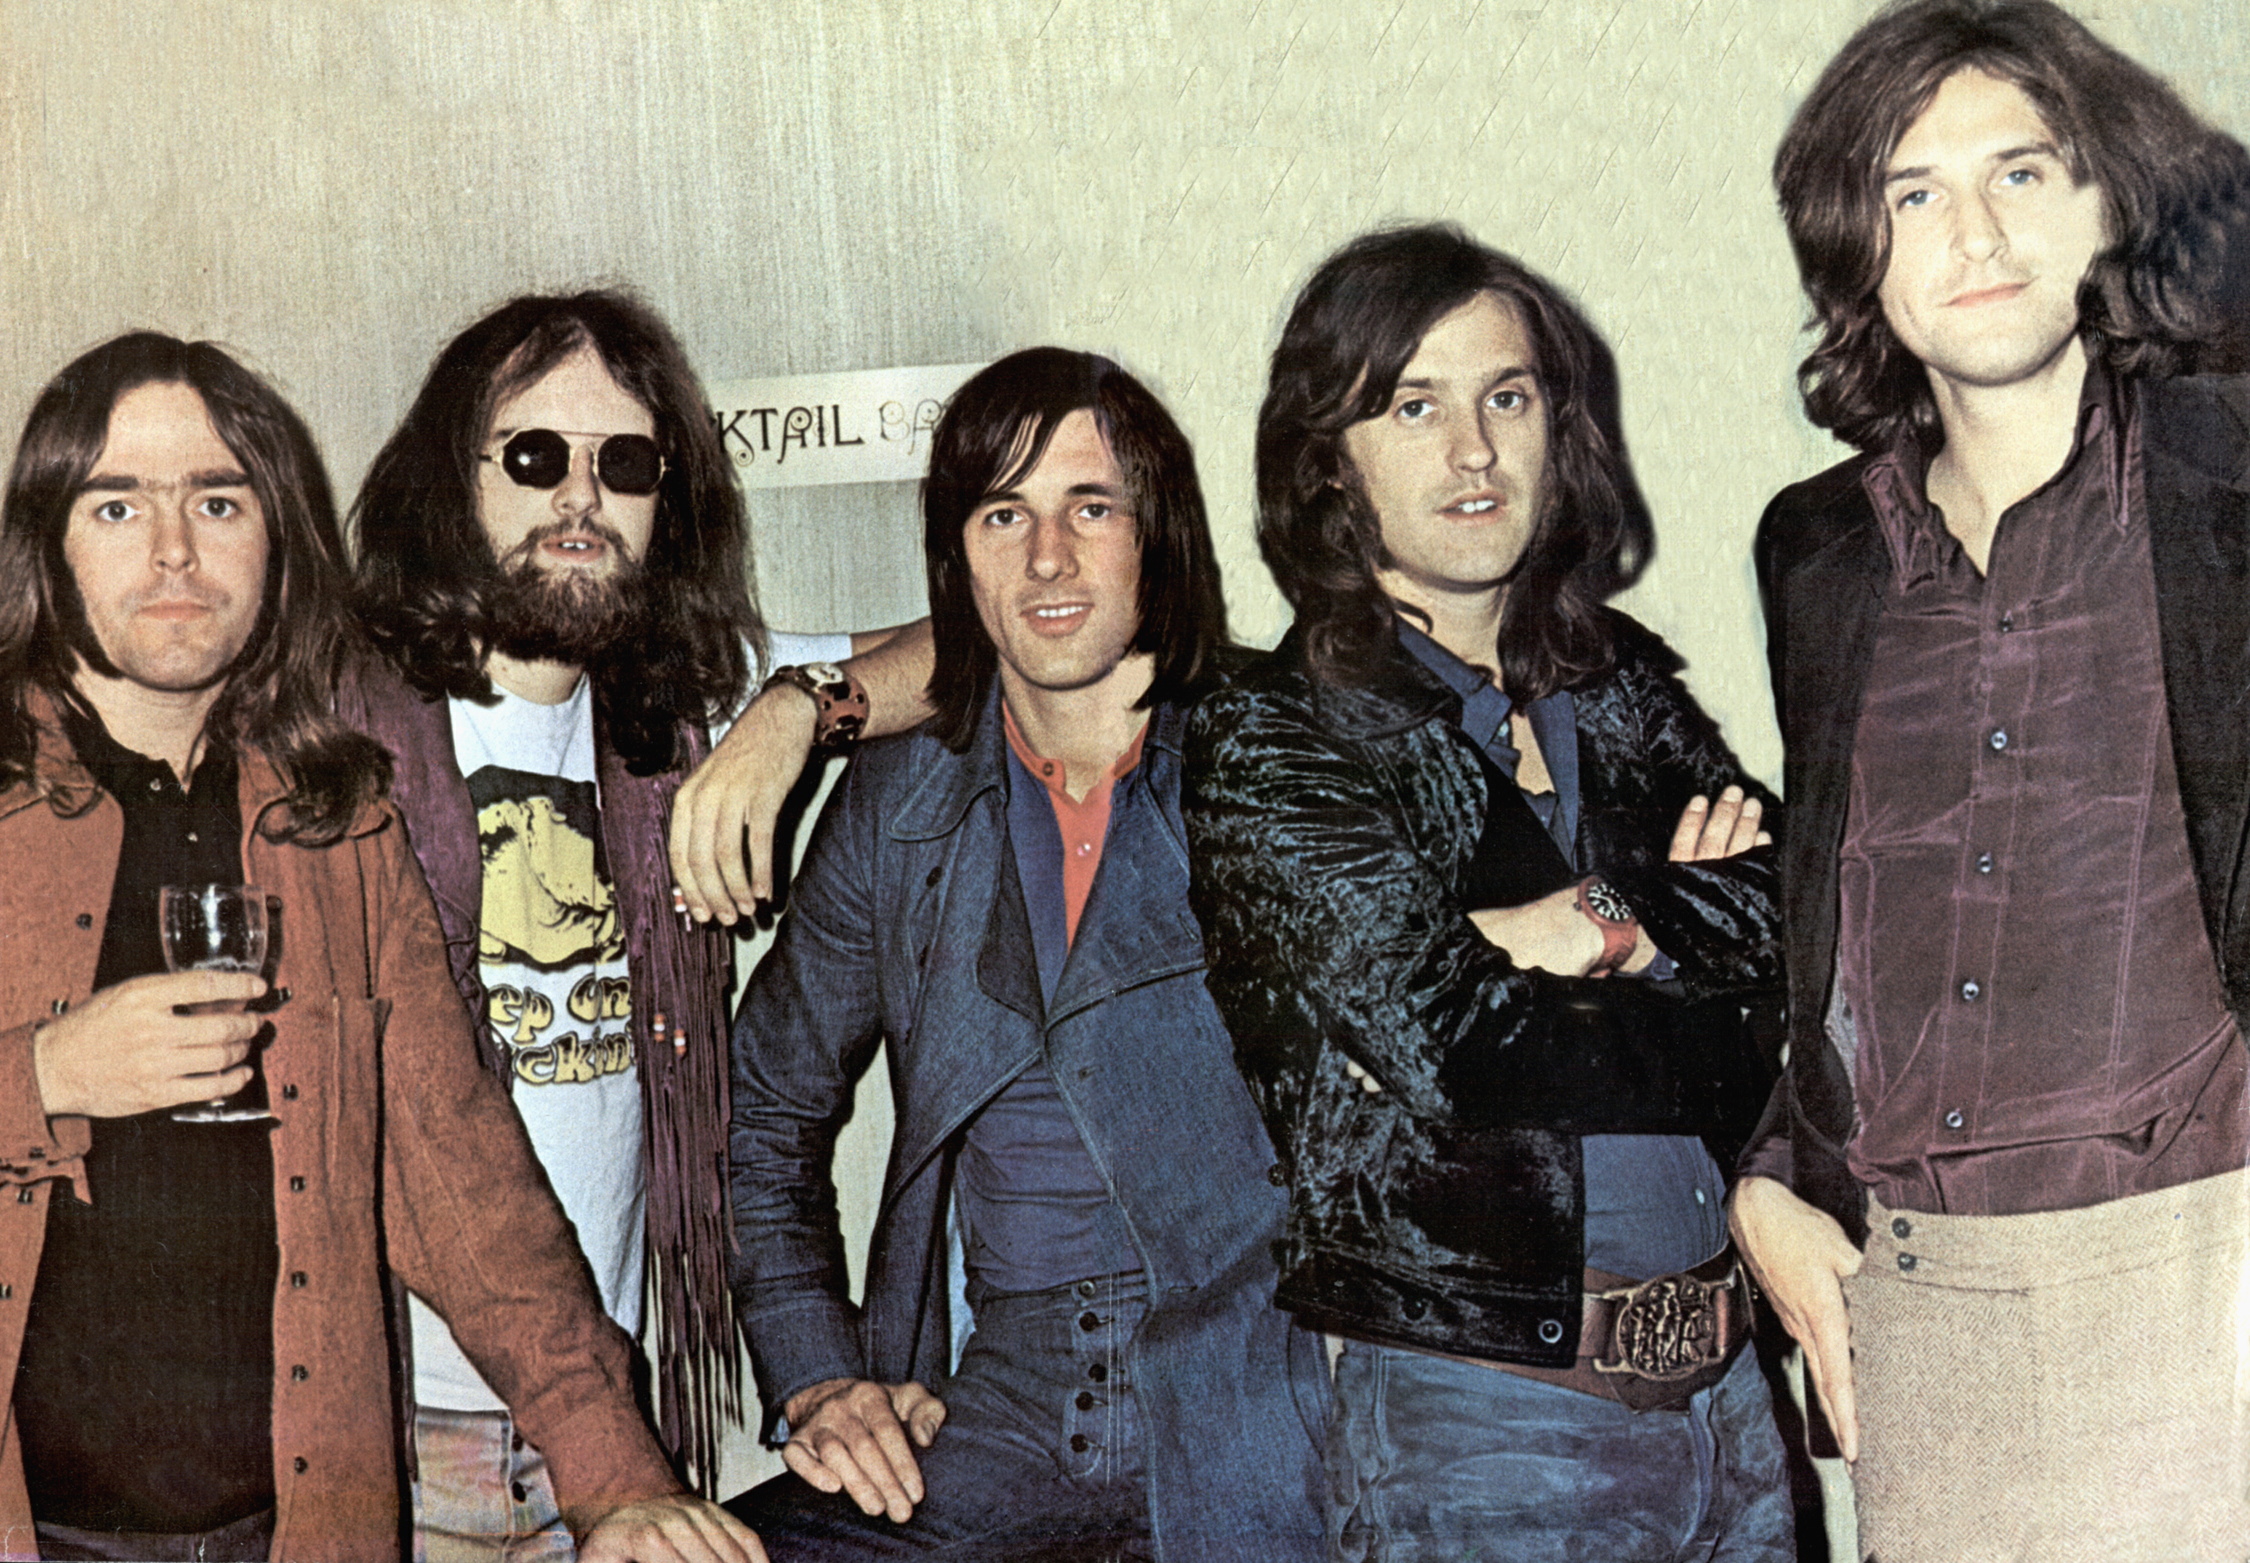 John Gosling (second-left) with The Kinks during their heyday